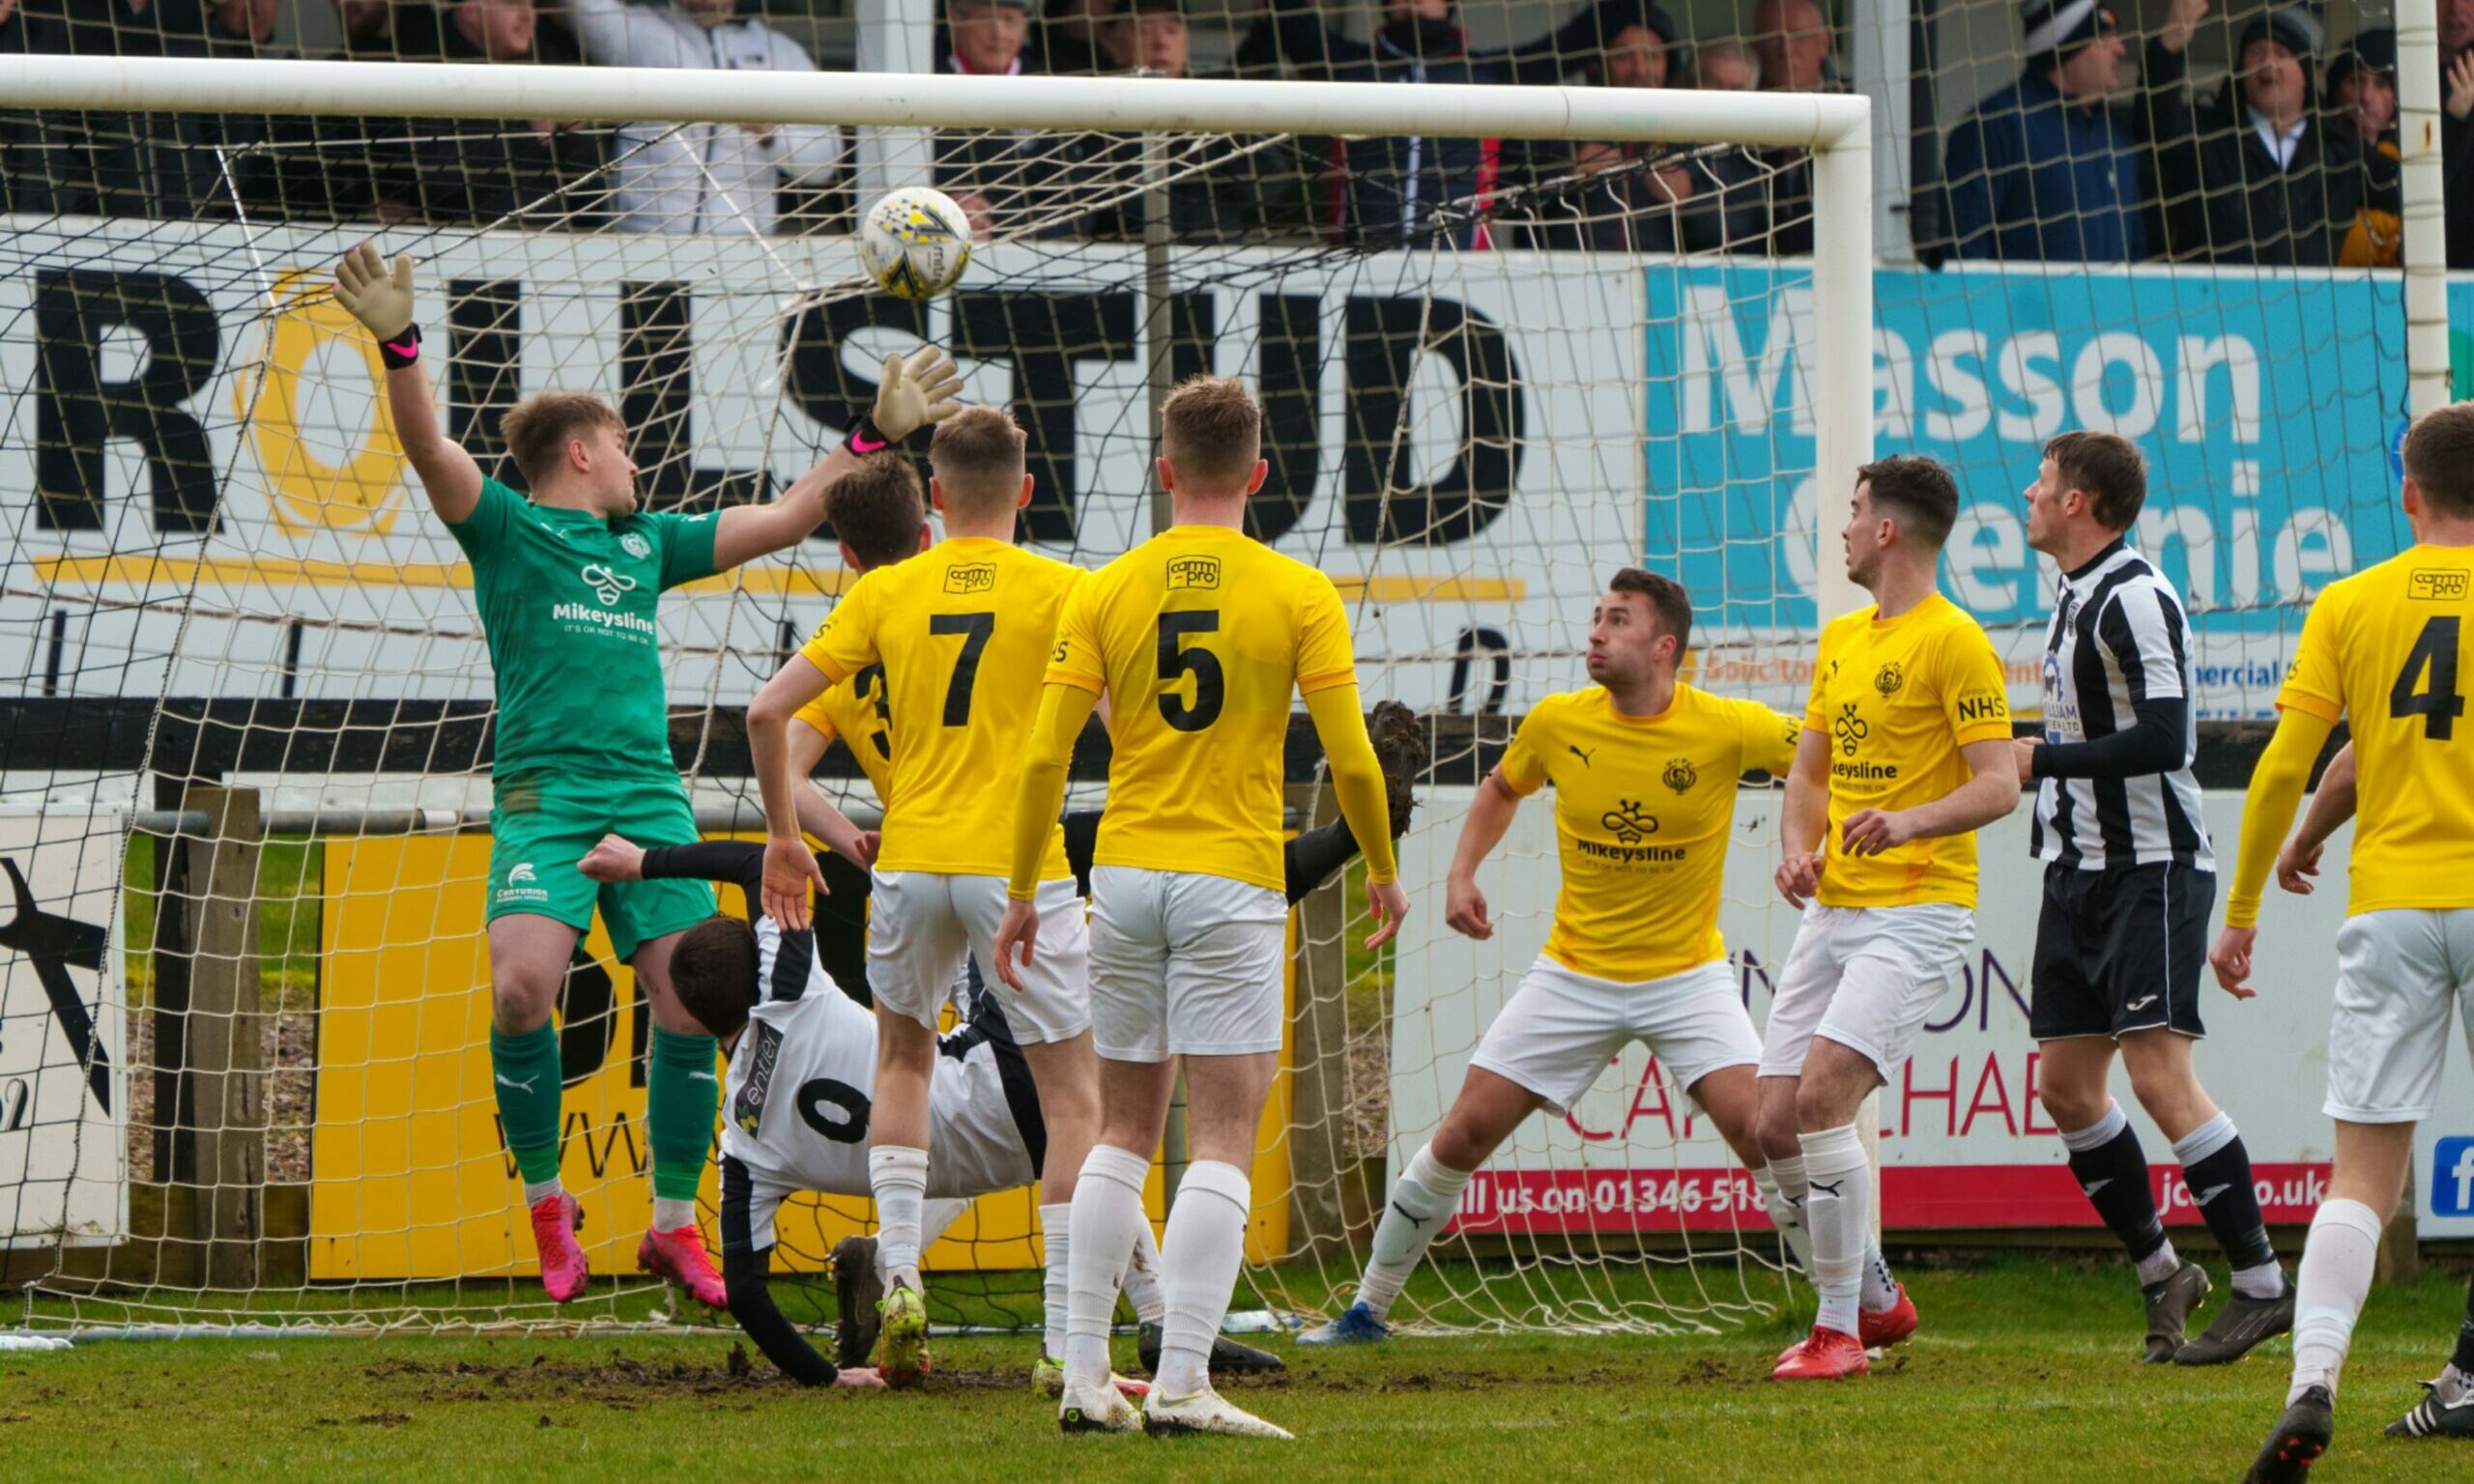 Ryan Cowie scores the only goal of the game as Fraserburgh defeat Nairn County.